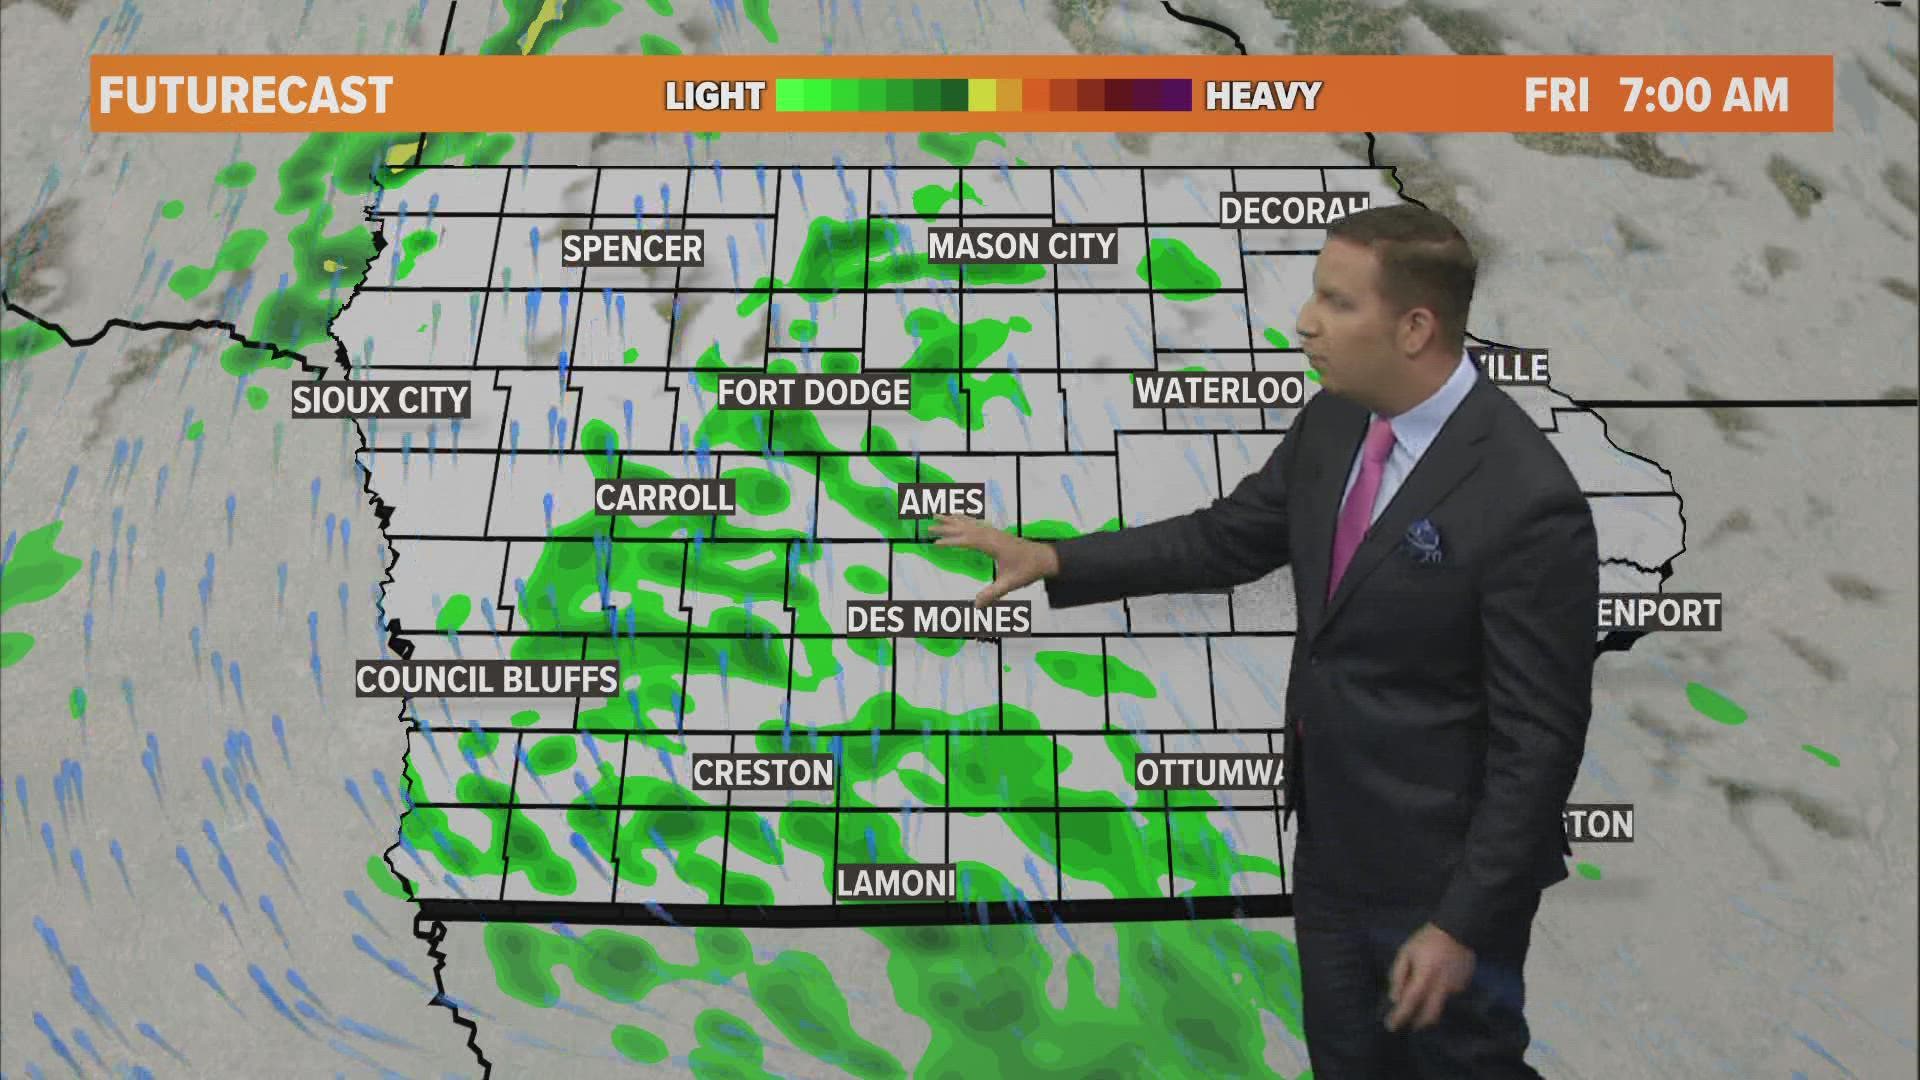 Scattered showers and clouds are expected throughout the day.